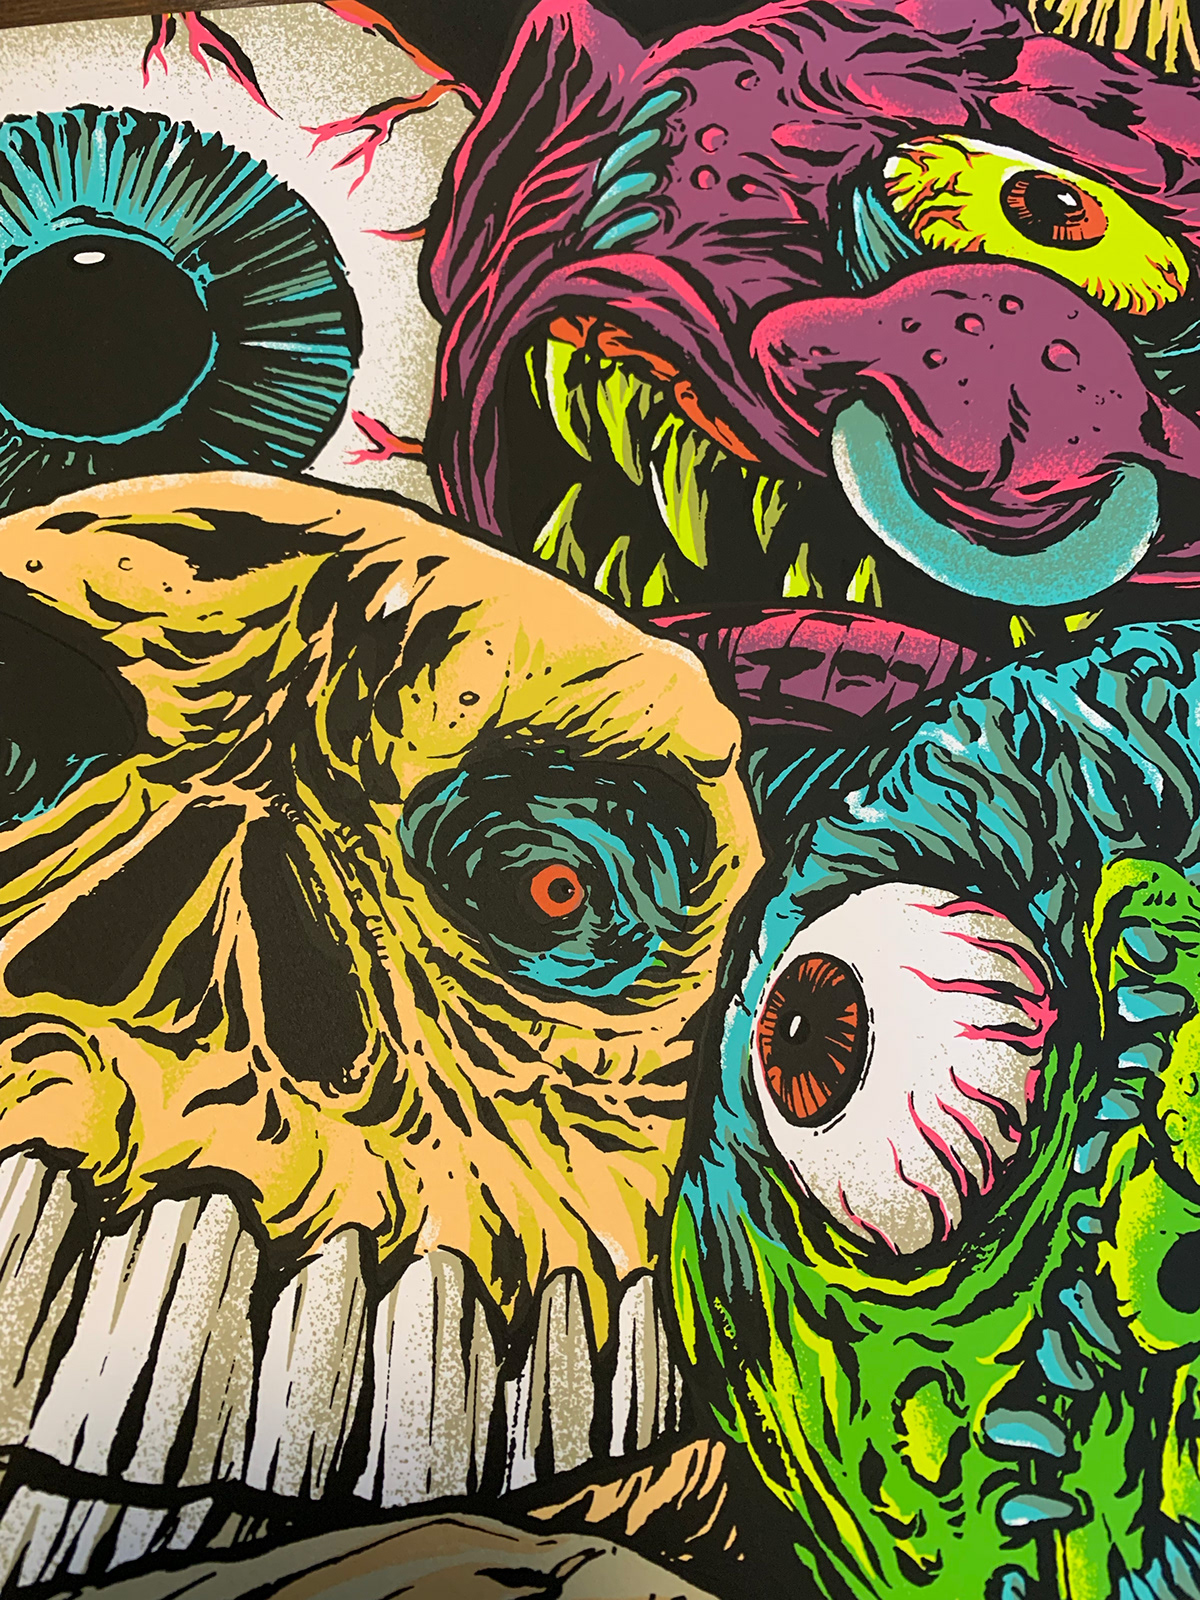 Madballs toys pen and ink markers 80s toys